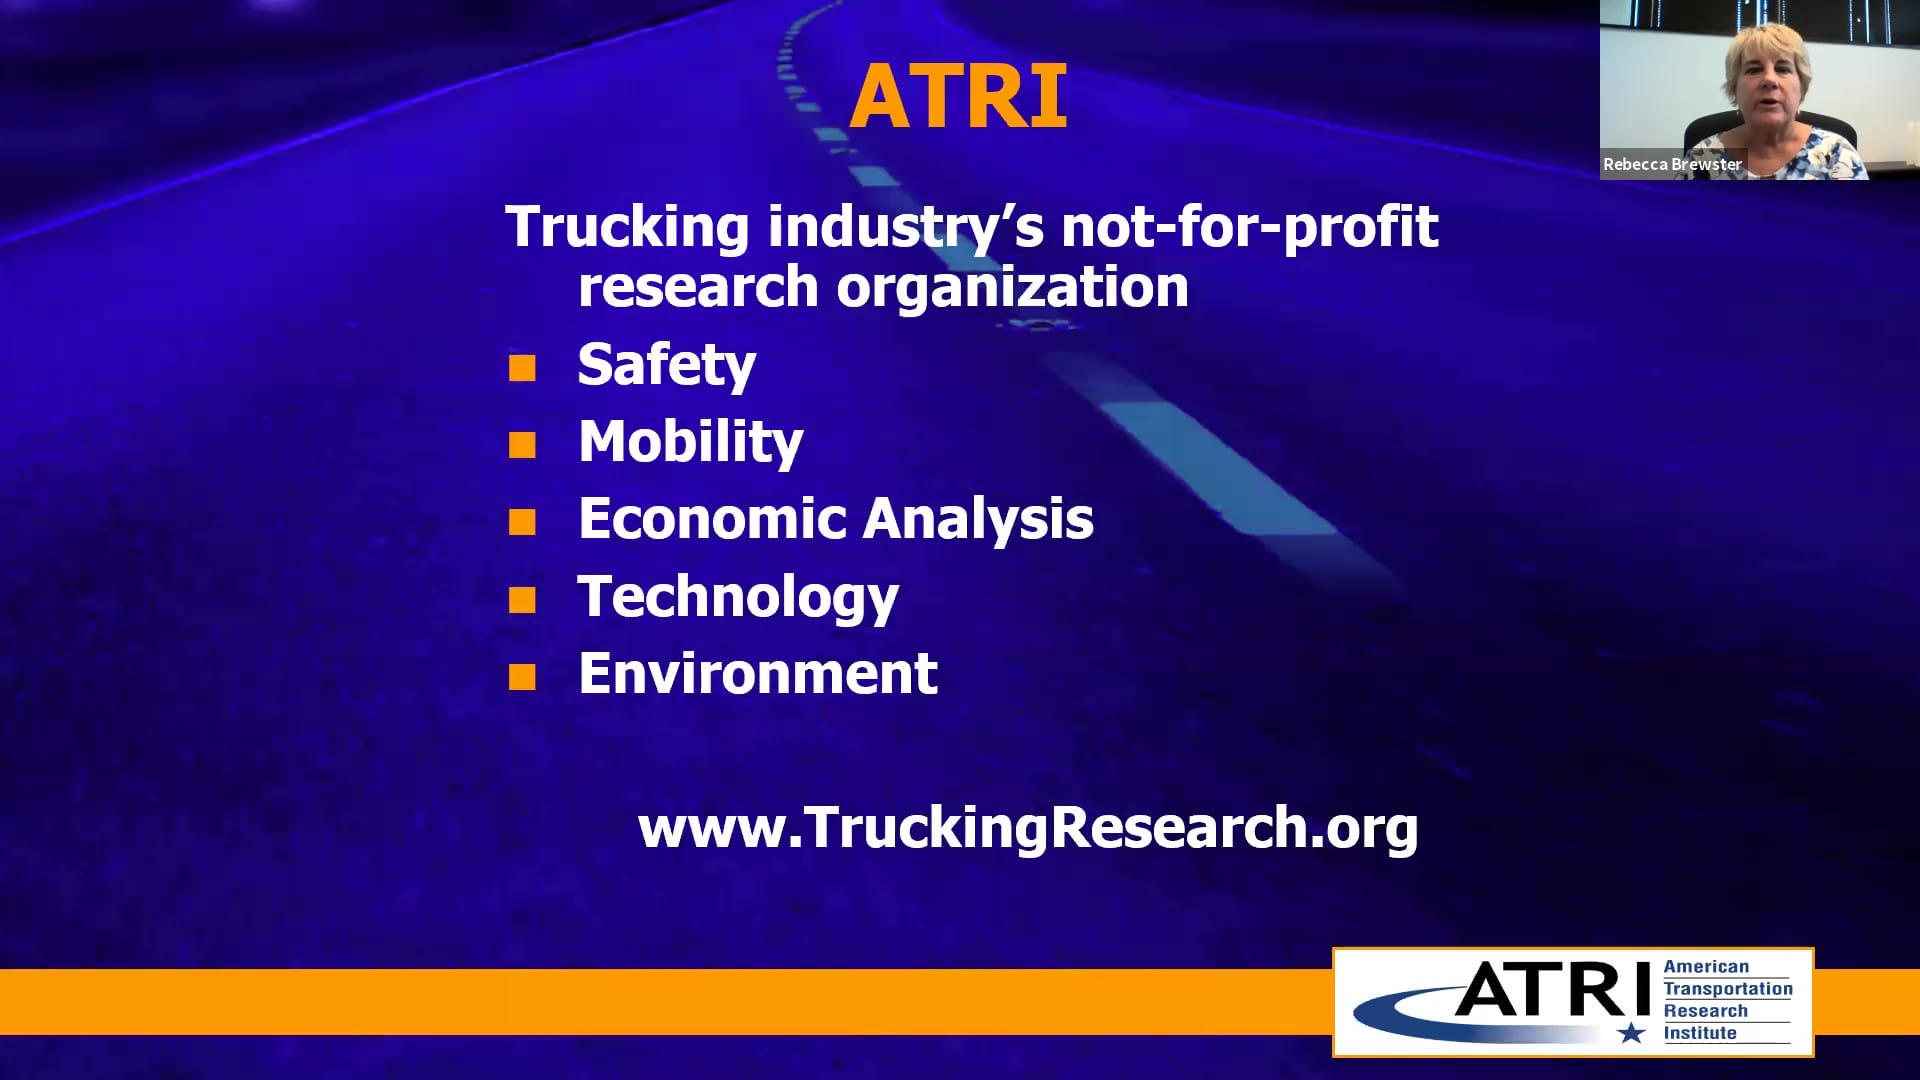 Trucking Industry Concerns 2020 from ATRI